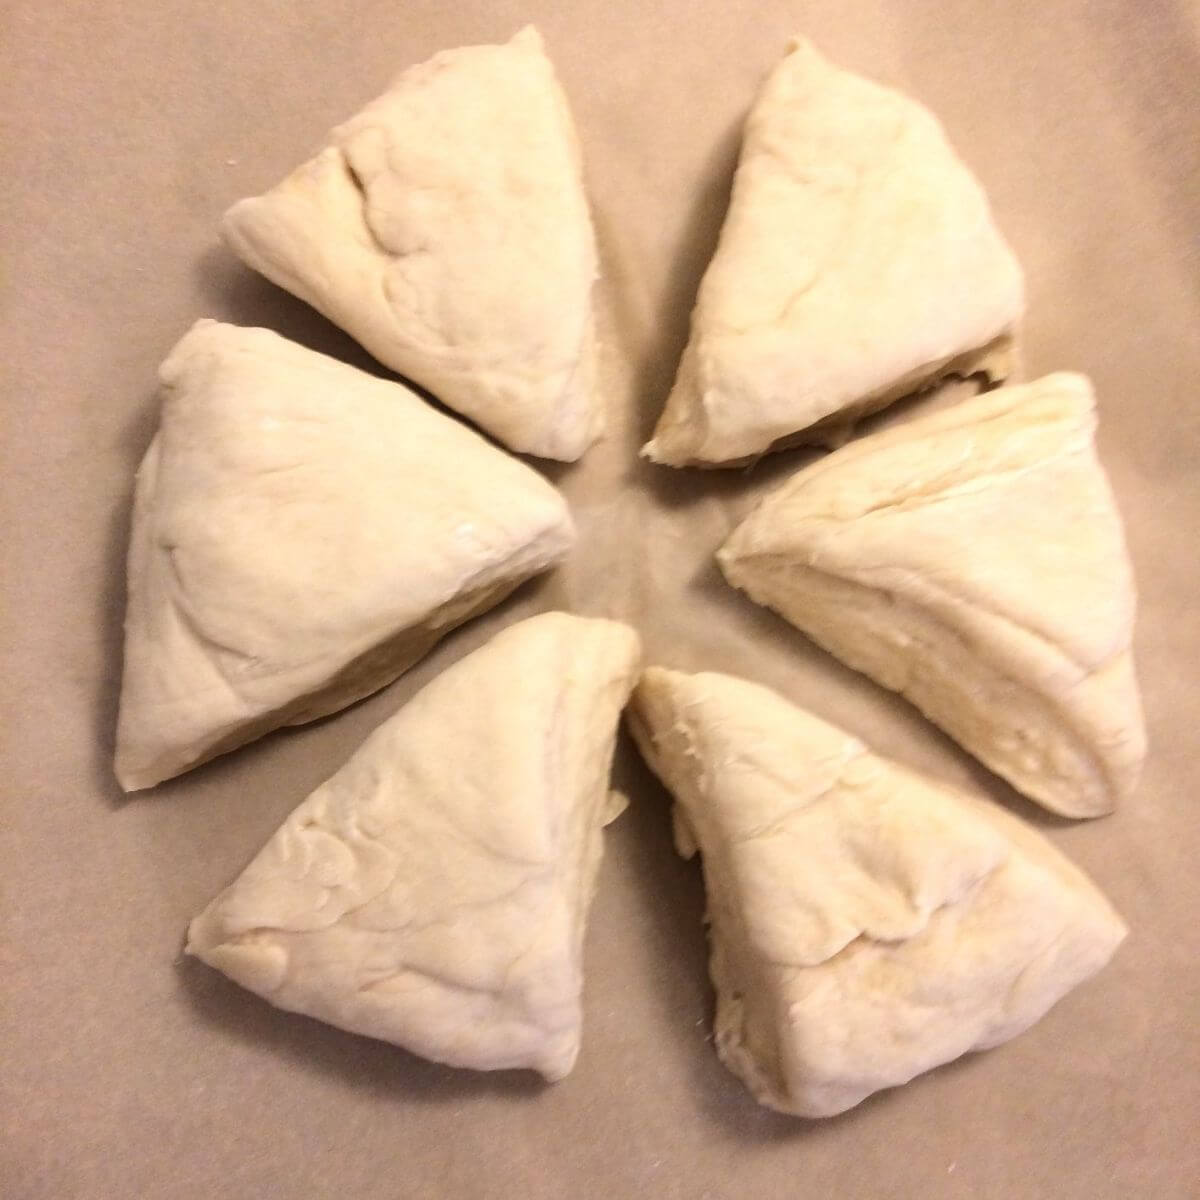 Risen dough cut into 6 equal portions triangle shaped, resting on parchment paper.